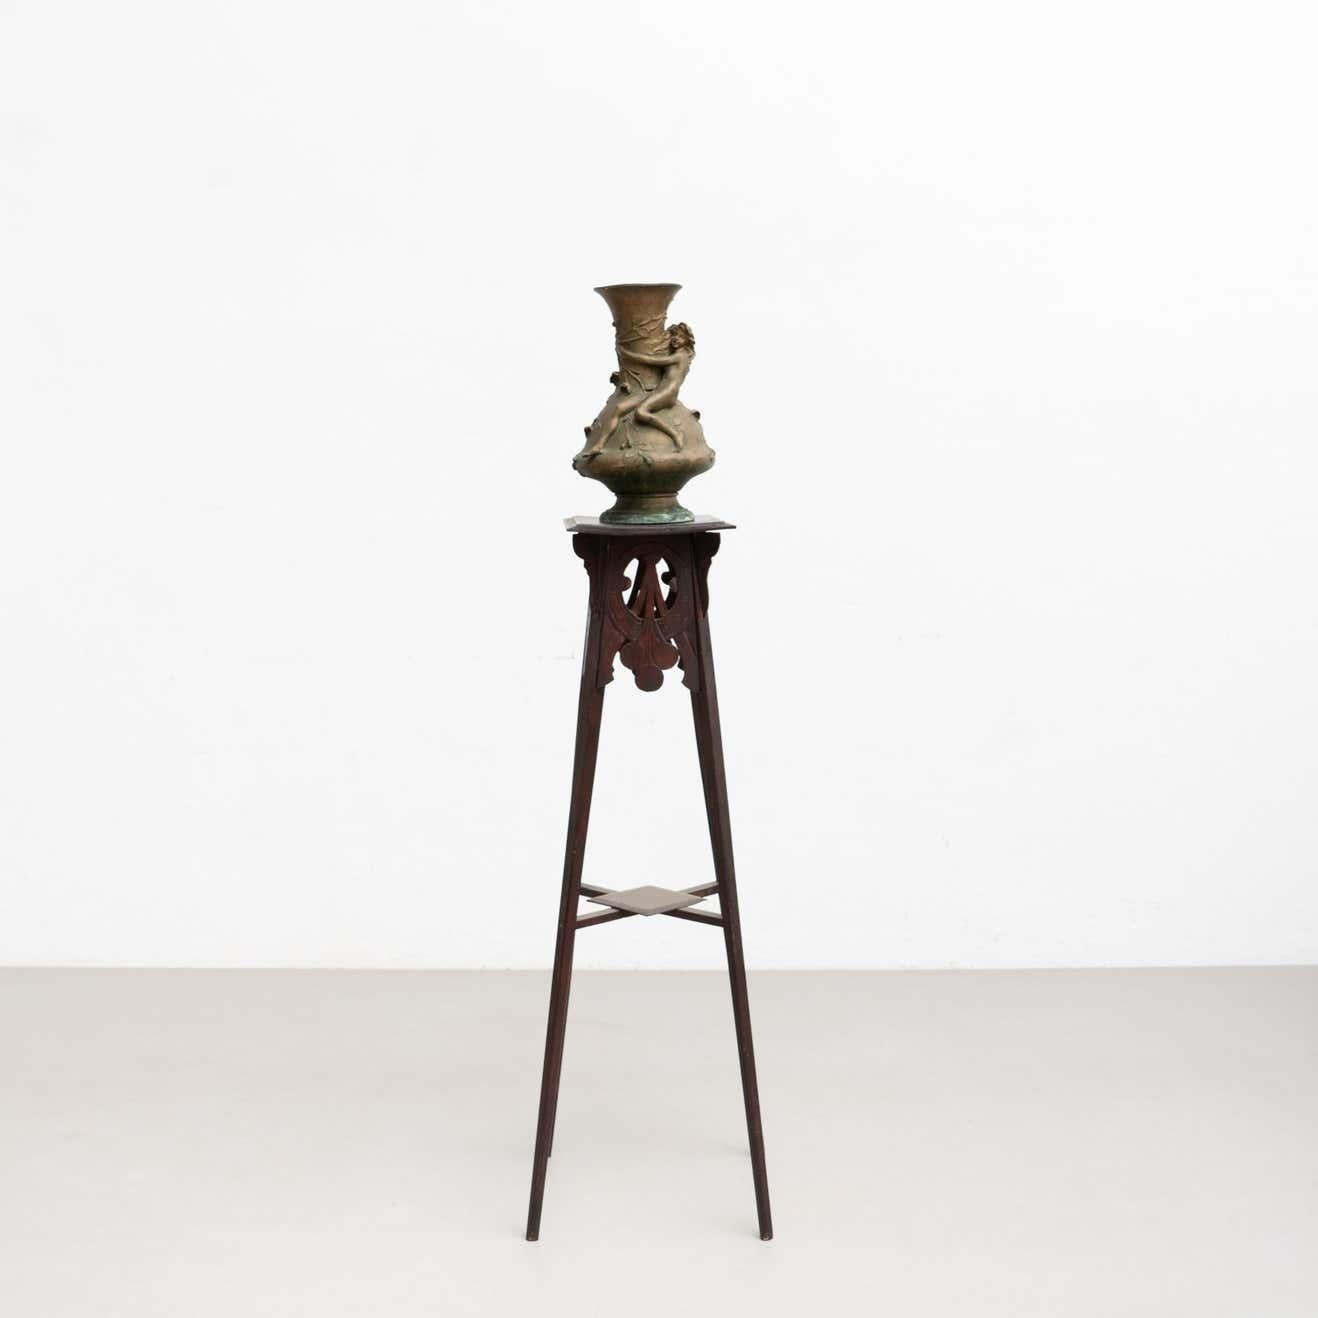 French Modernist Bronze Vase by Noel R, circa 1930 For Sale